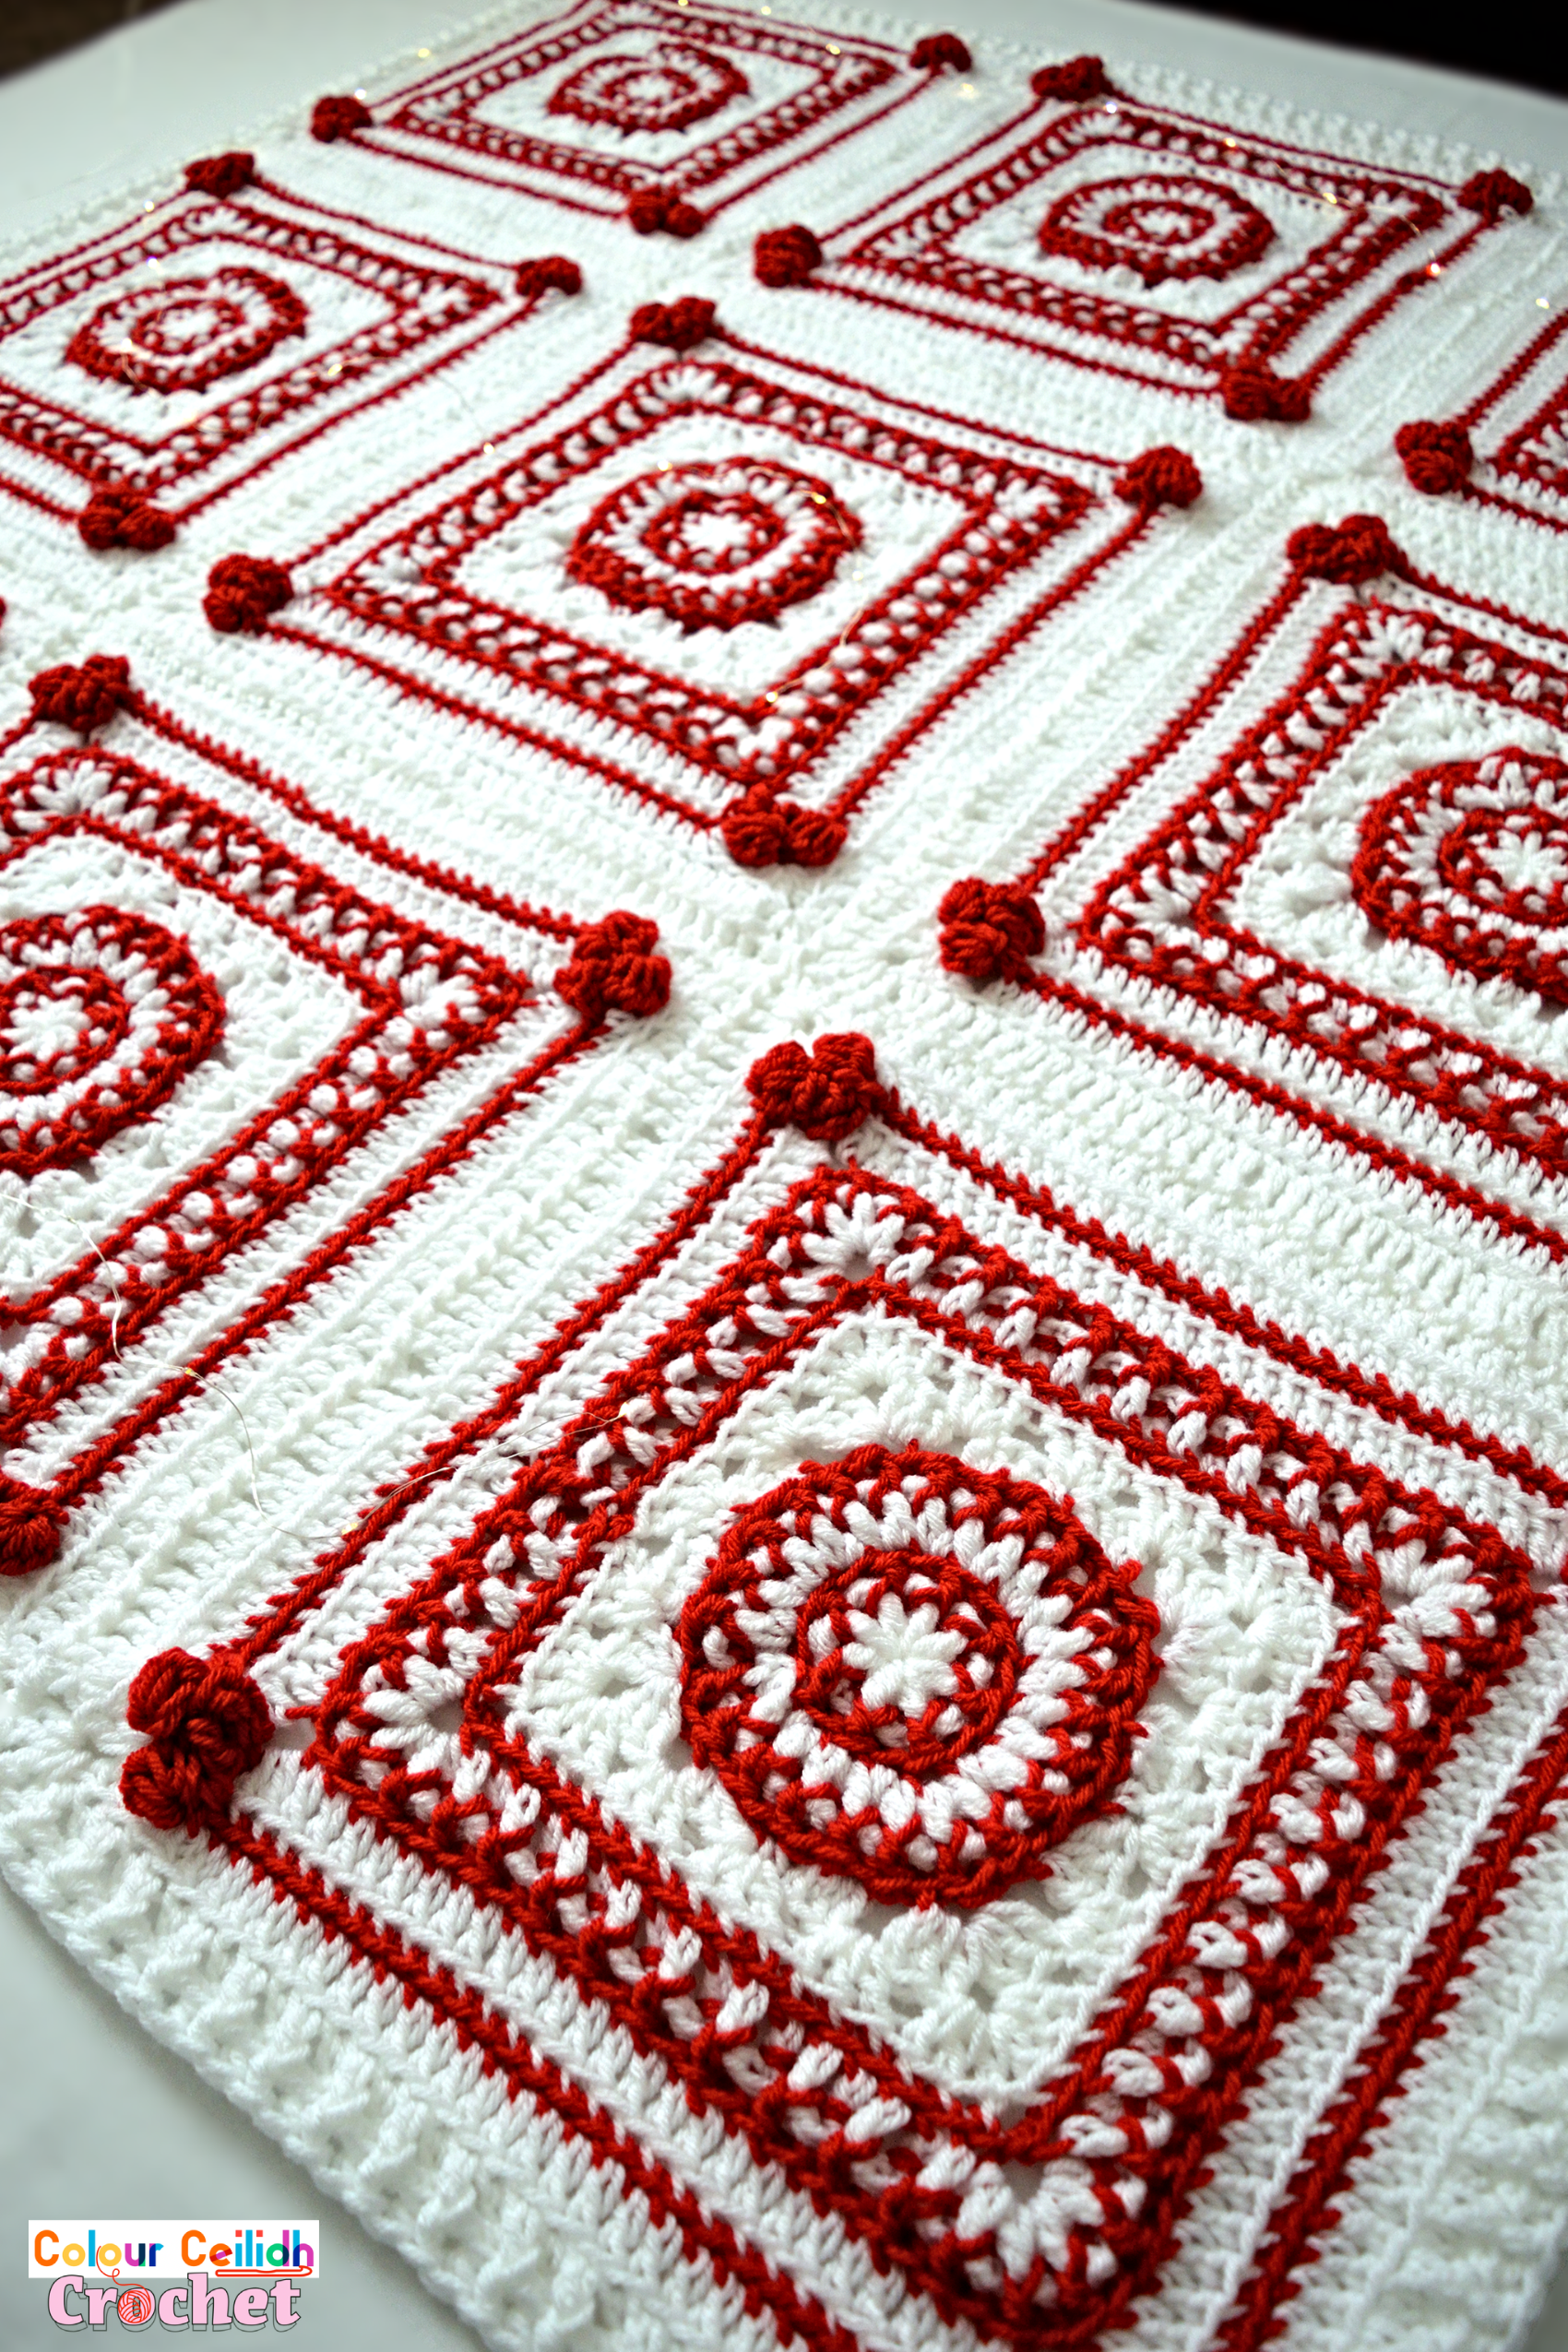 This Christmas crochet blanket pattern is a Scandinavian style afghan with bobble hearts and eight-pointed Nordic stars. Using worsted weight yarn I combine two bold red and white colors for maximum effect to instantly set the Christmas atmosphere. This free pattern includes a YouTube video tutorial. Matching Scandinavian style crochet baubles are available as a separate pattern.